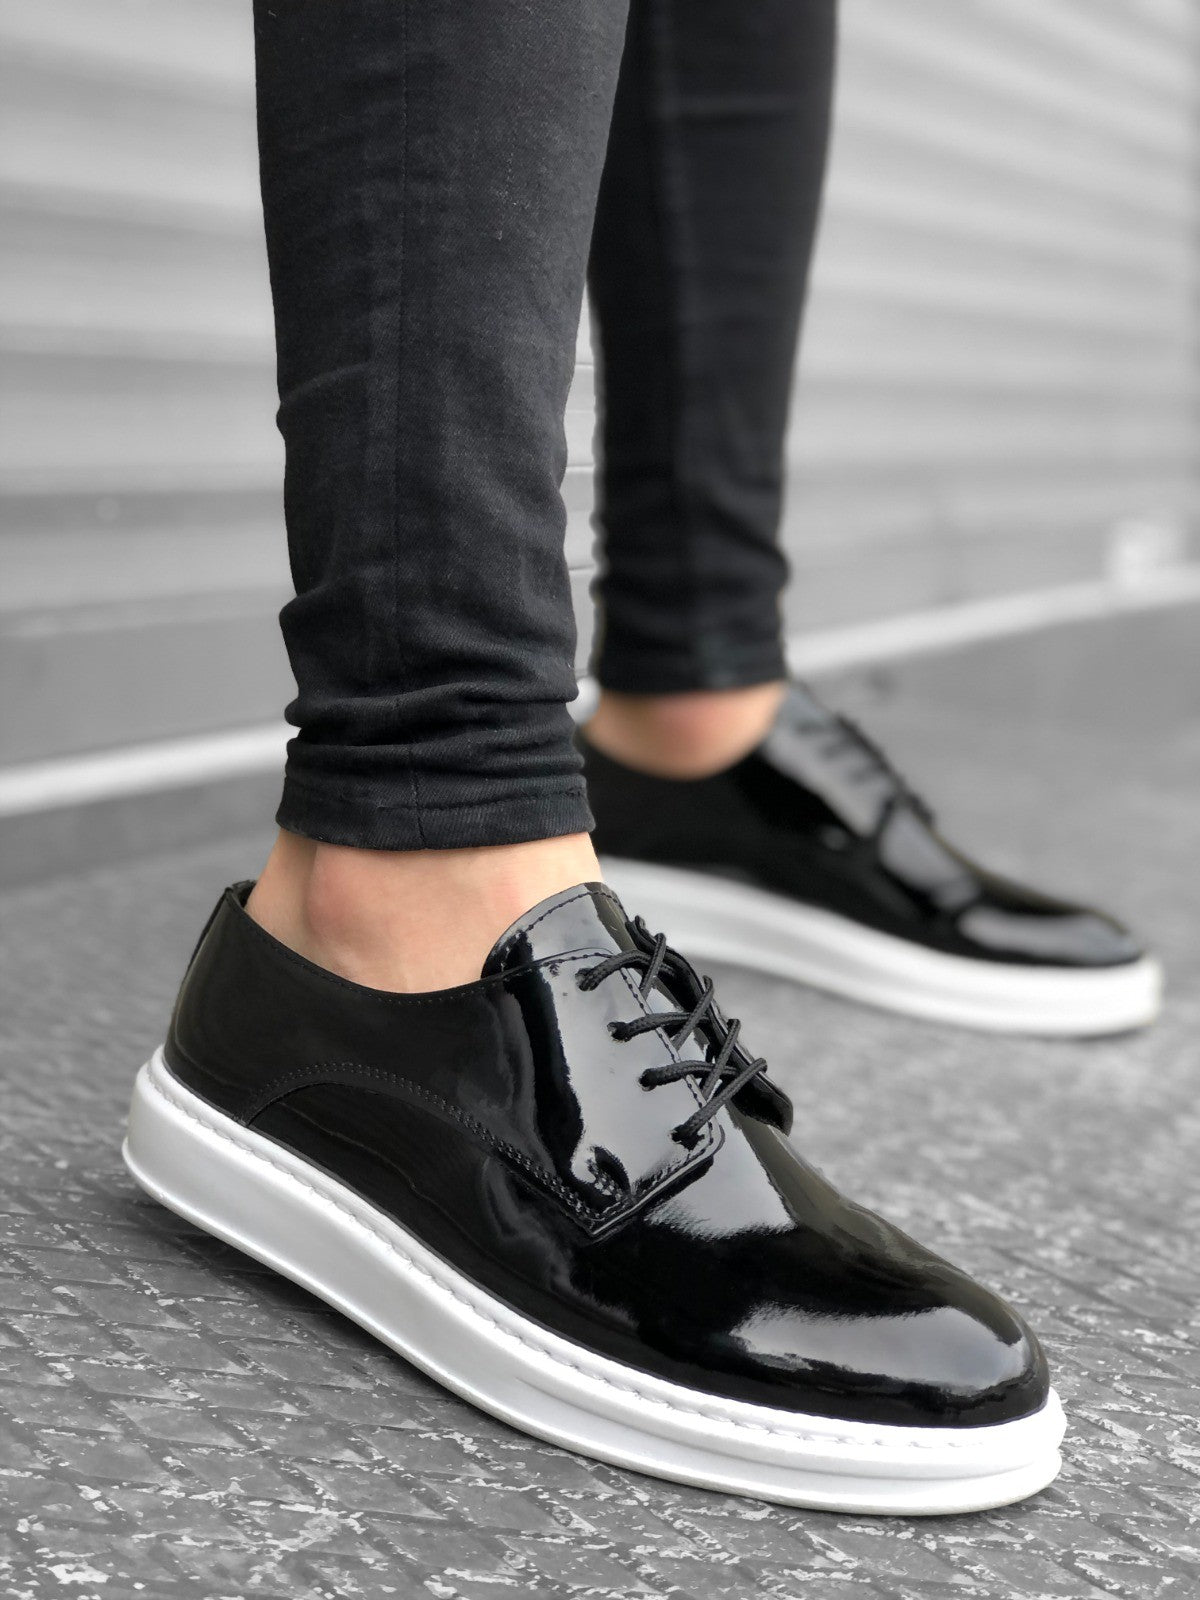 BA0003 Lace-Up Classic Black Patent Leather High Sole Casual Men's Shoes - STREETMODE ™